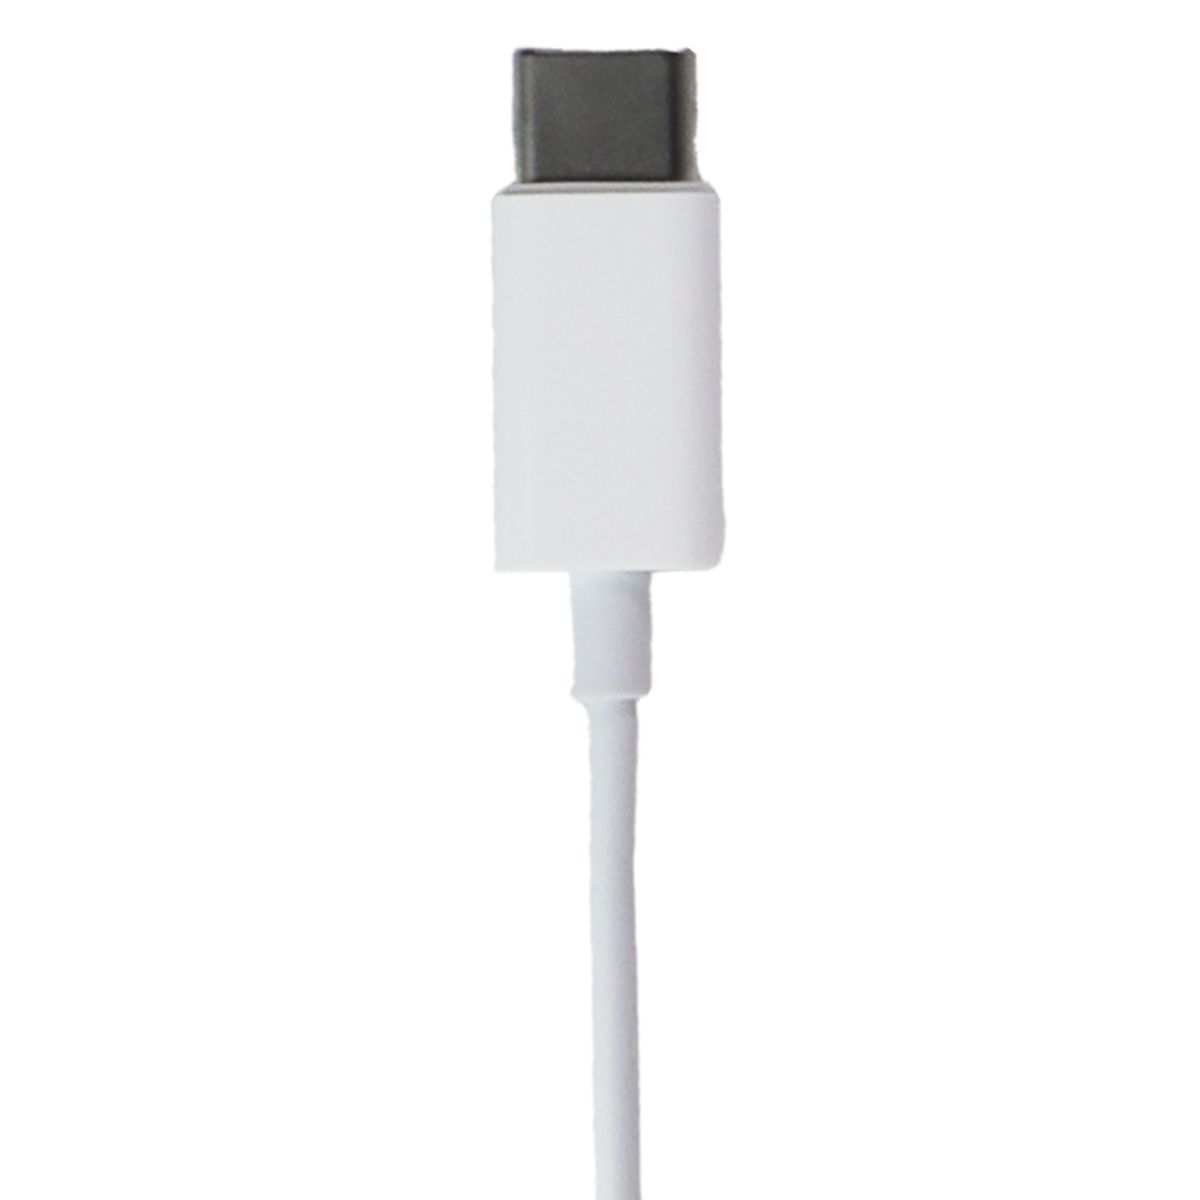 Apple Genuine Wired USB-C EarPods Headphones - White (MTJY3AM/A) Portable Audio - Headphones Apple    - Simple Cell Bulk Wholesale Pricing - USA Seller